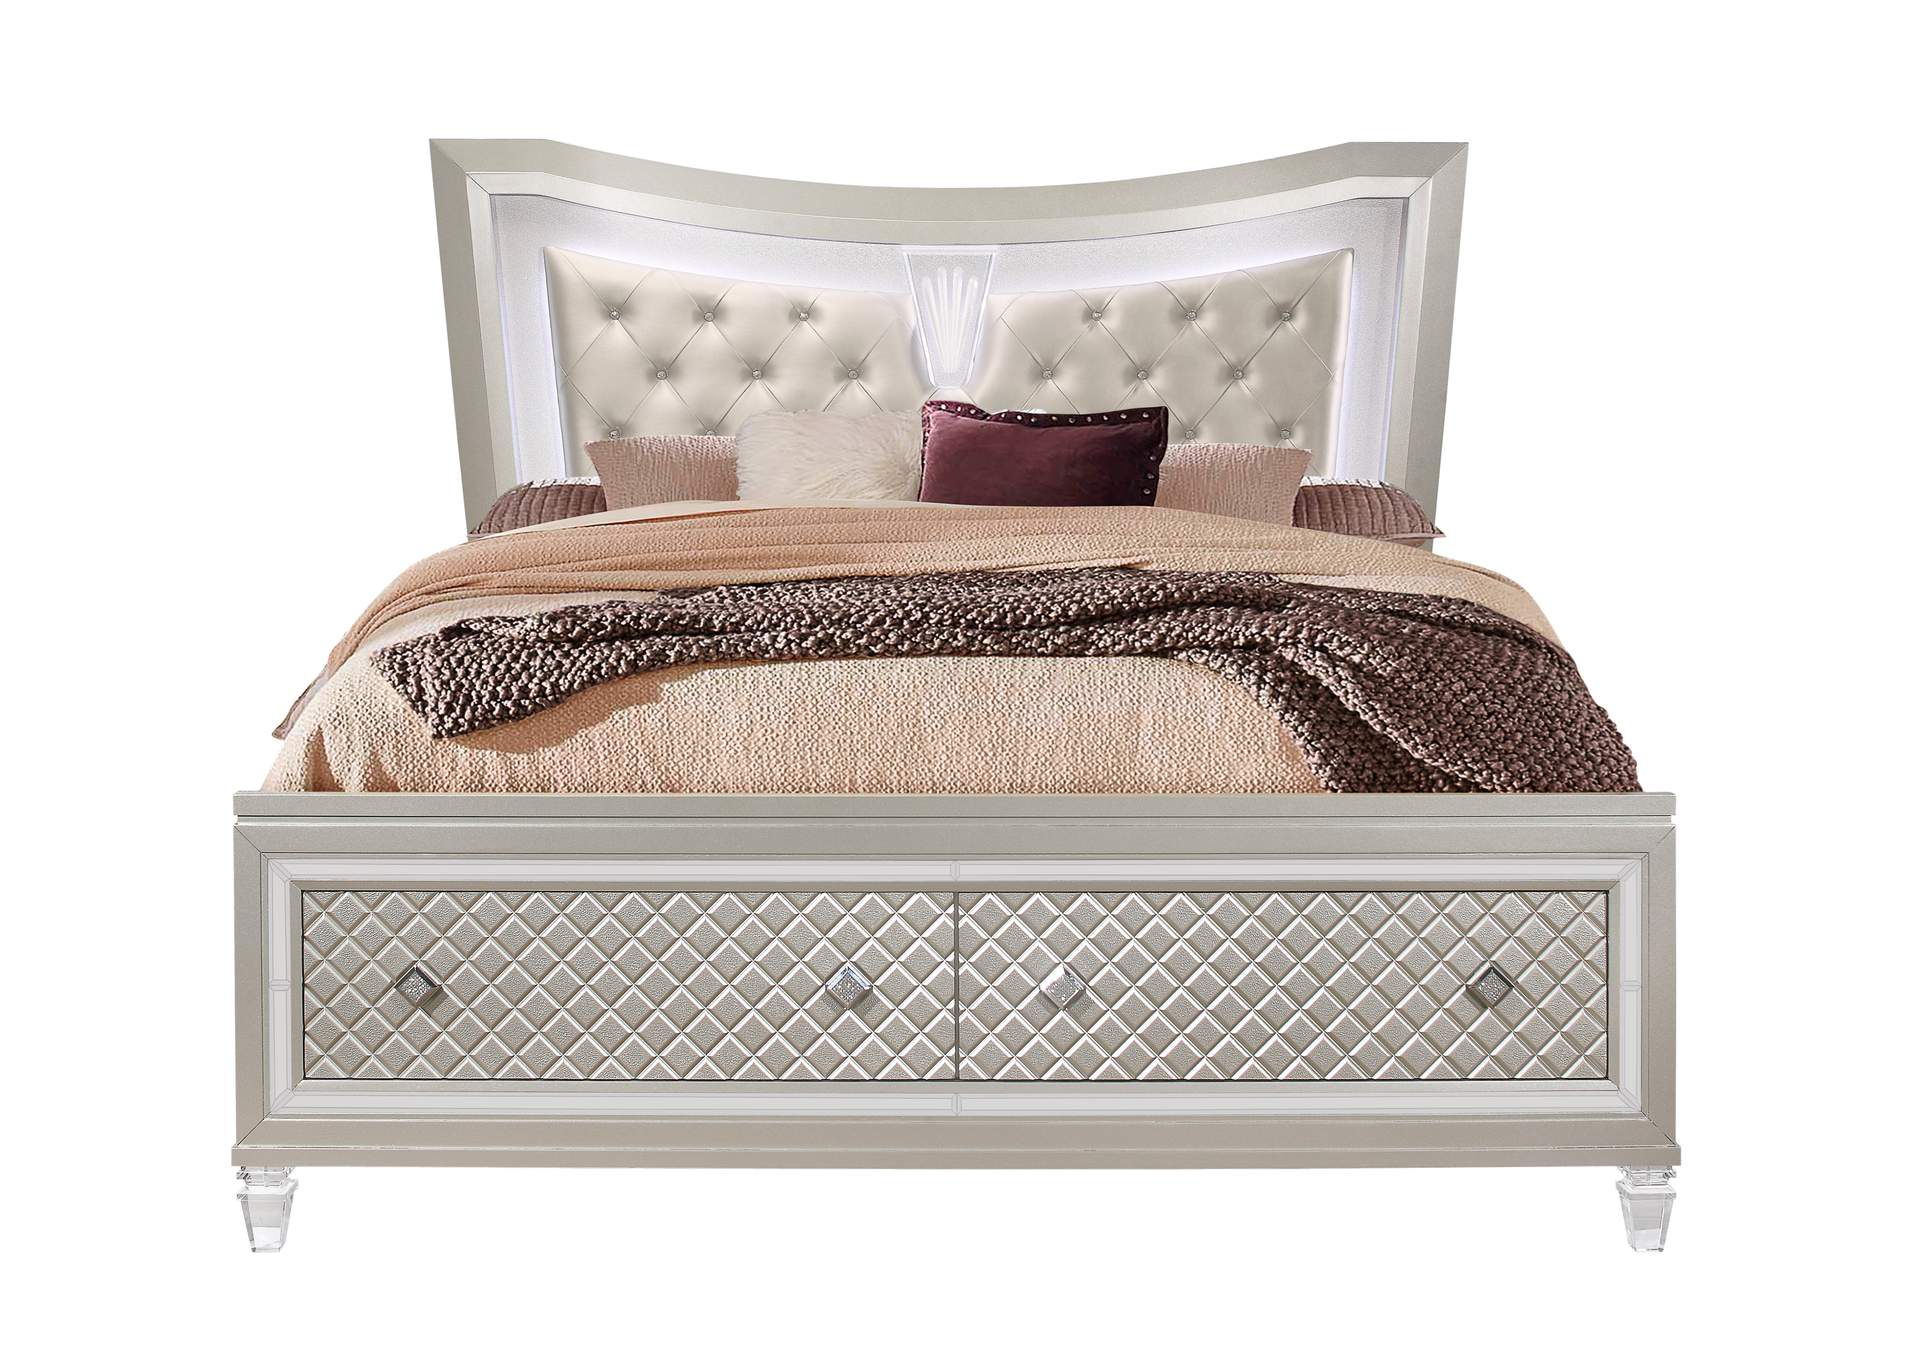 Champagne Paris Queen Bed,Global Furniture USA